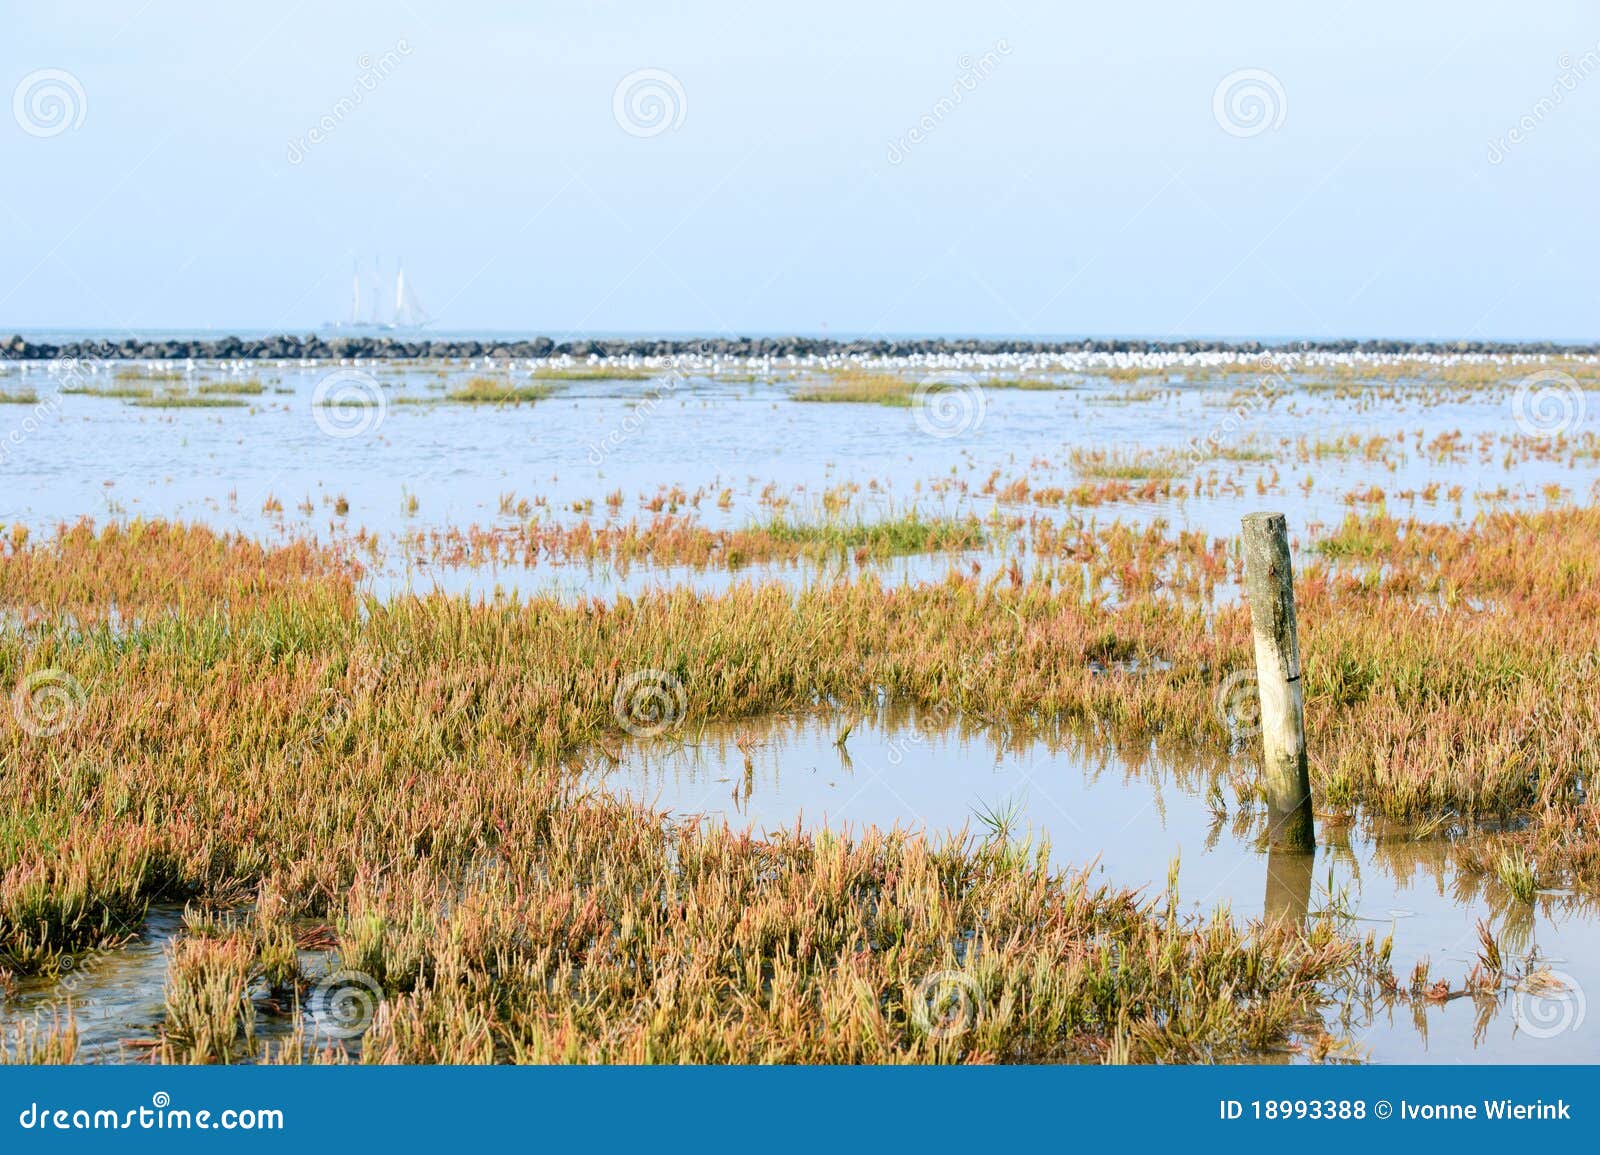 low tide at the wadden island